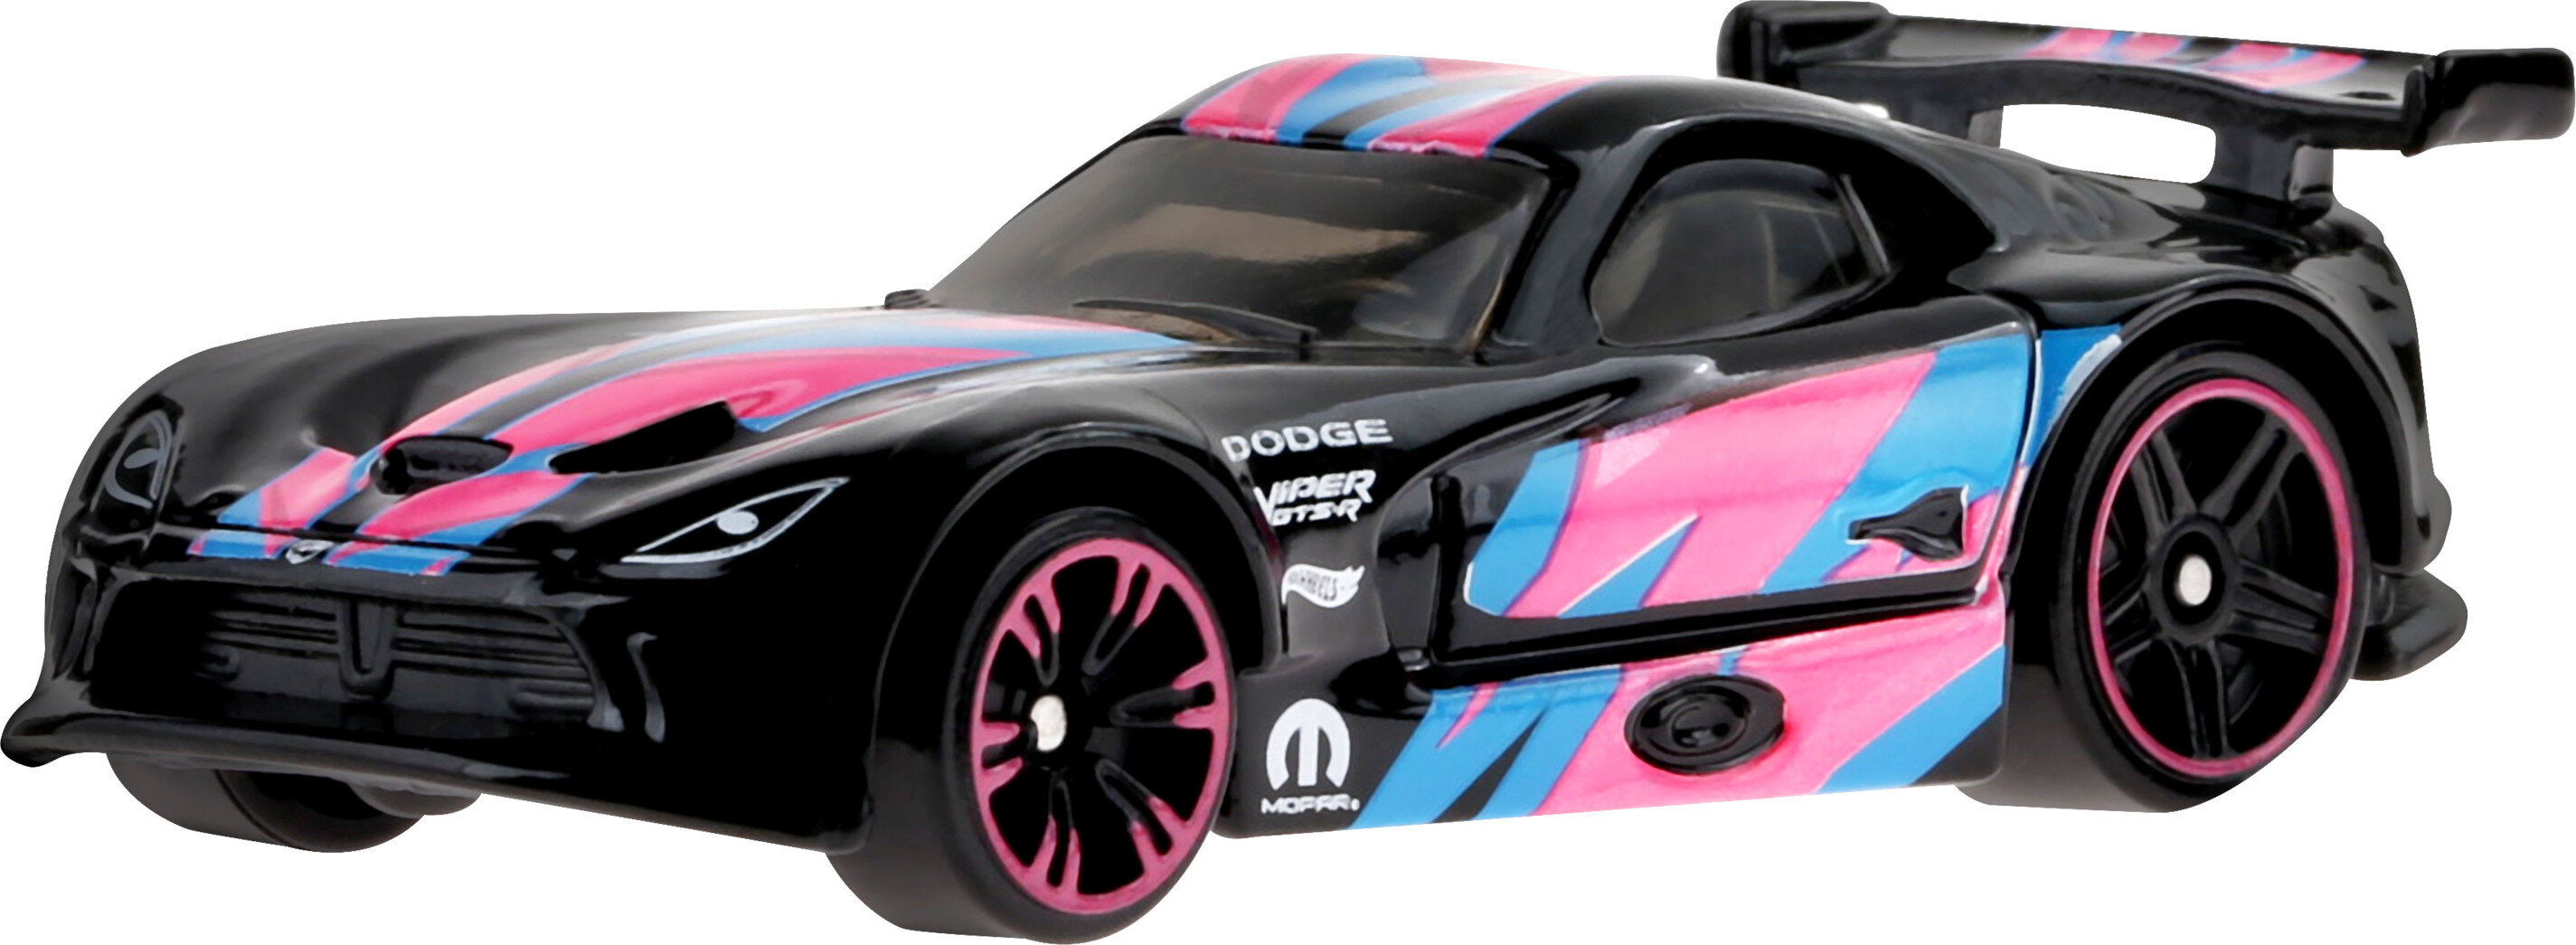 Hot Wheels Cars, Neon Speeders, 1 Die-Cast Toy Car in 1:64 Scale with Neon Designs - image 1 of 6